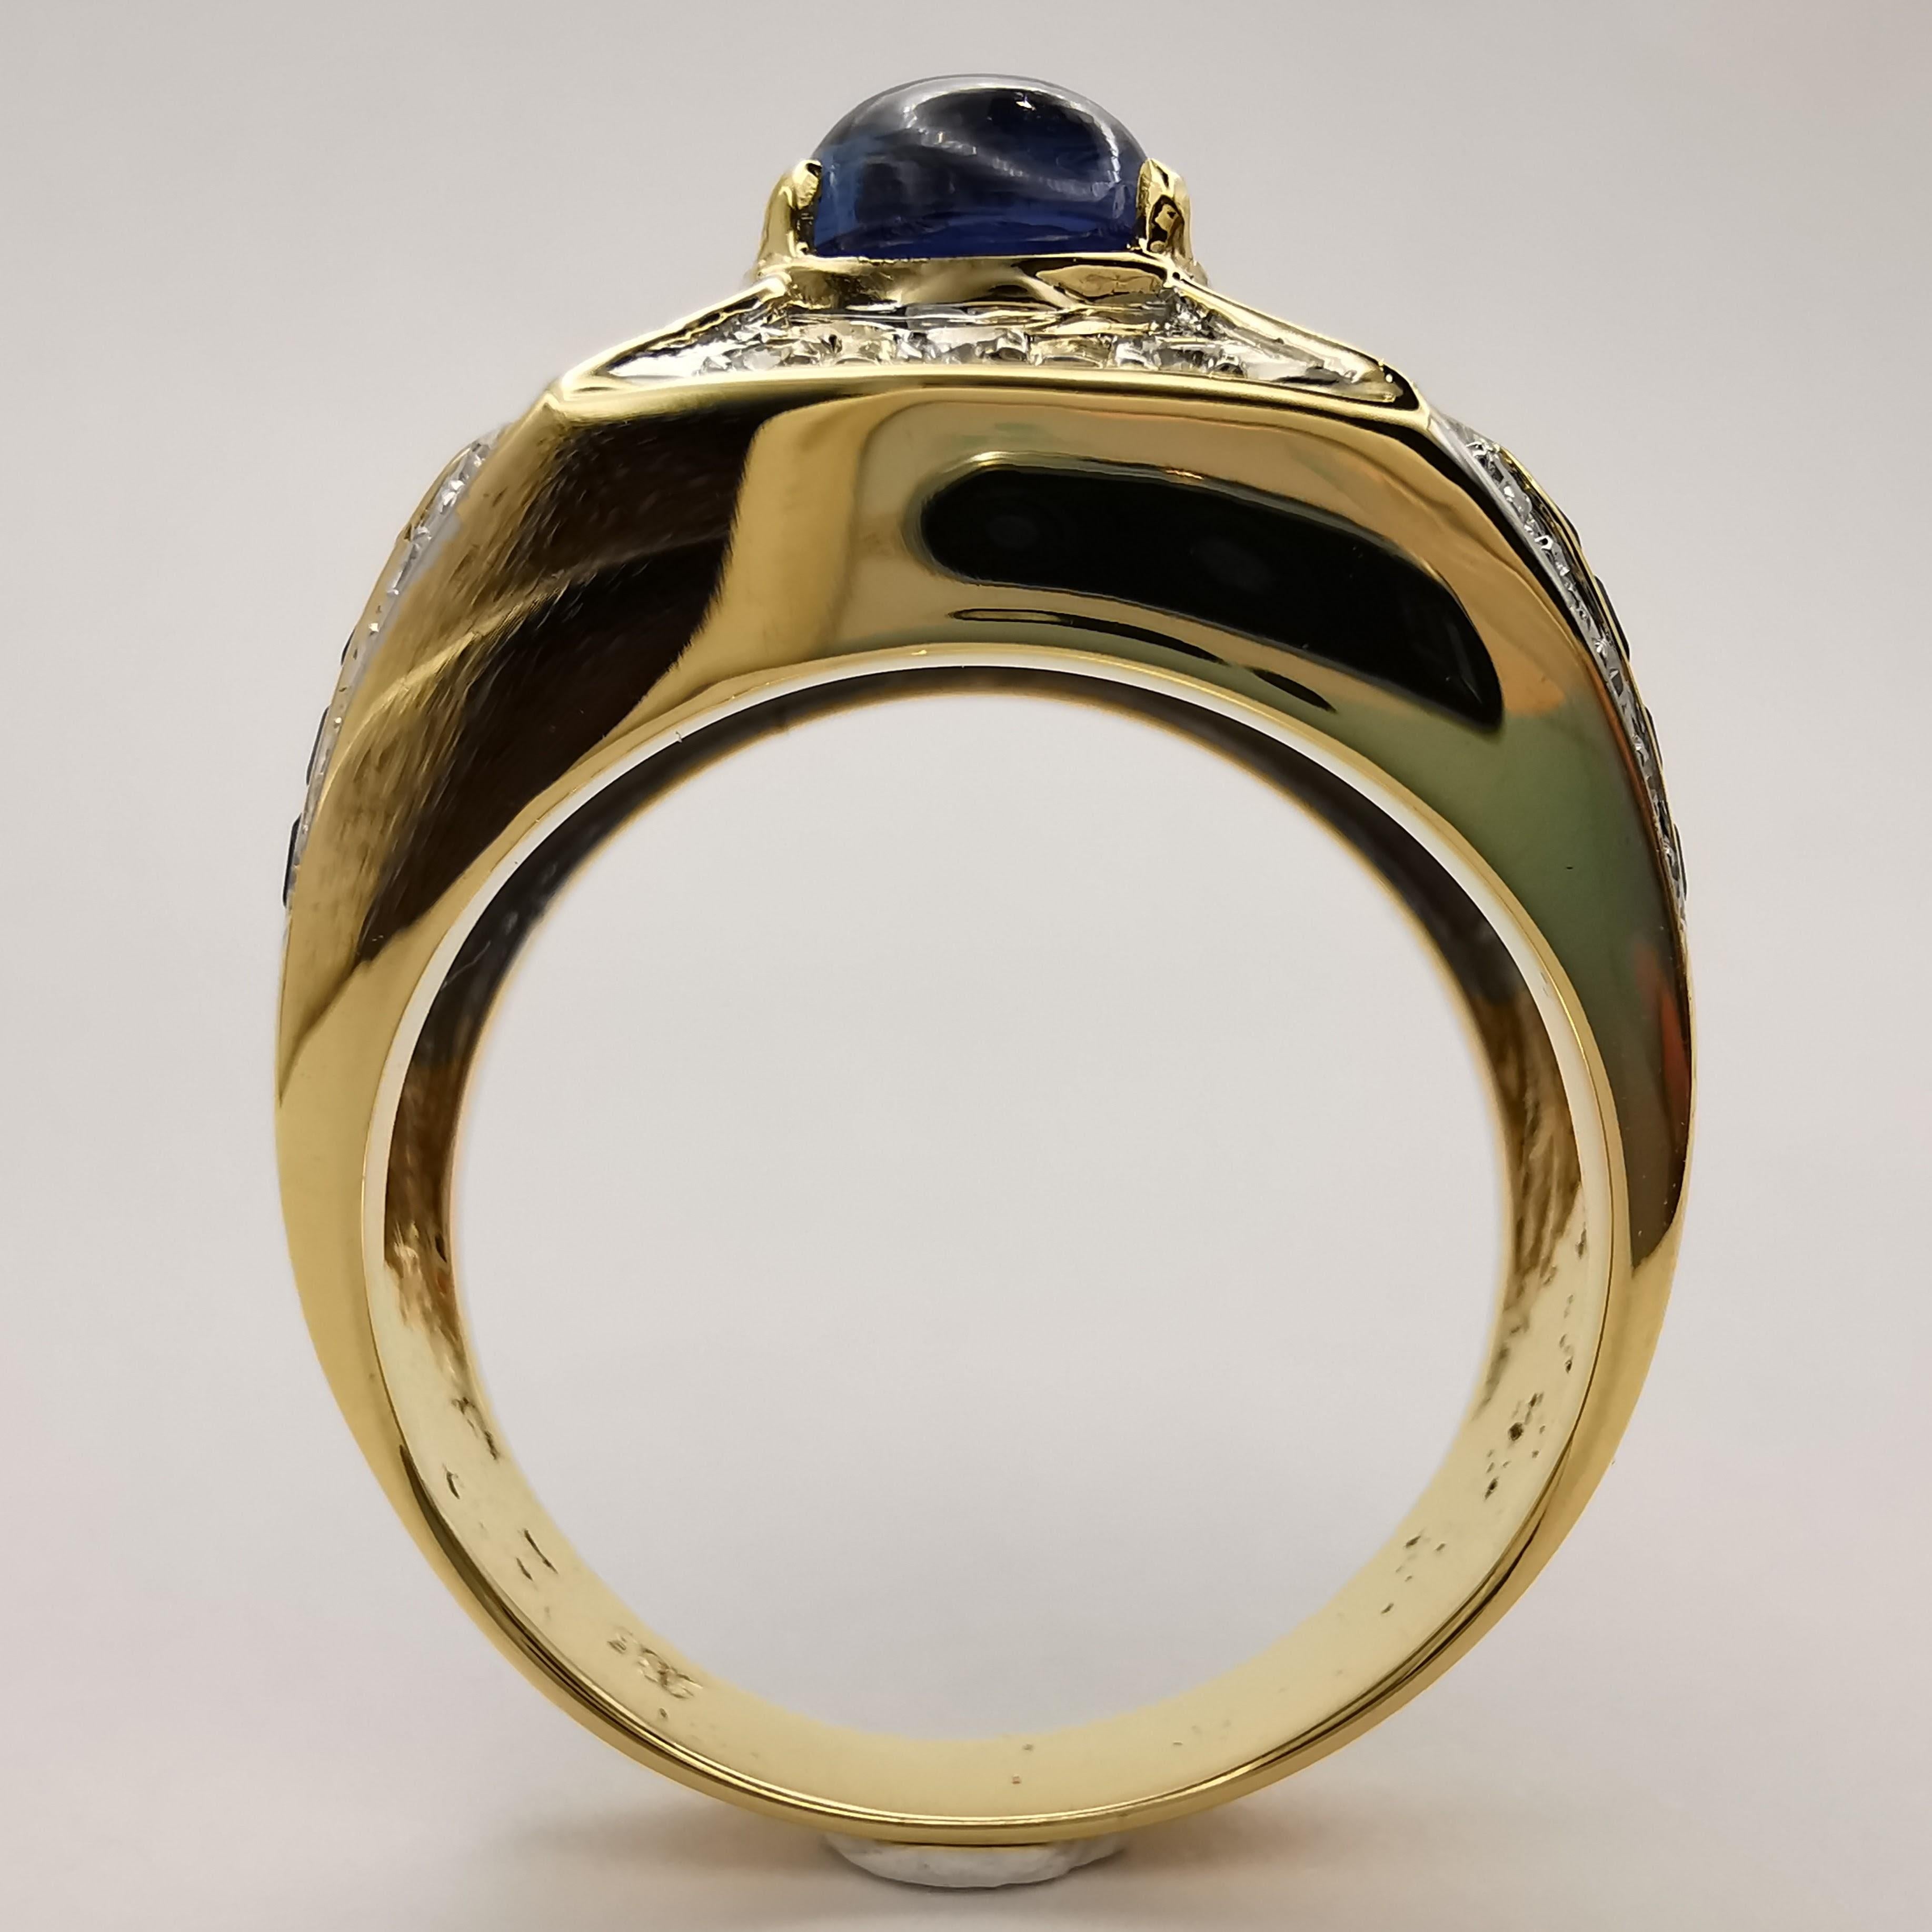 2.11ct Oval Cabochon Royal Blue Sapphire Diamond Art Deco Men's Ring in 14k Gold 1